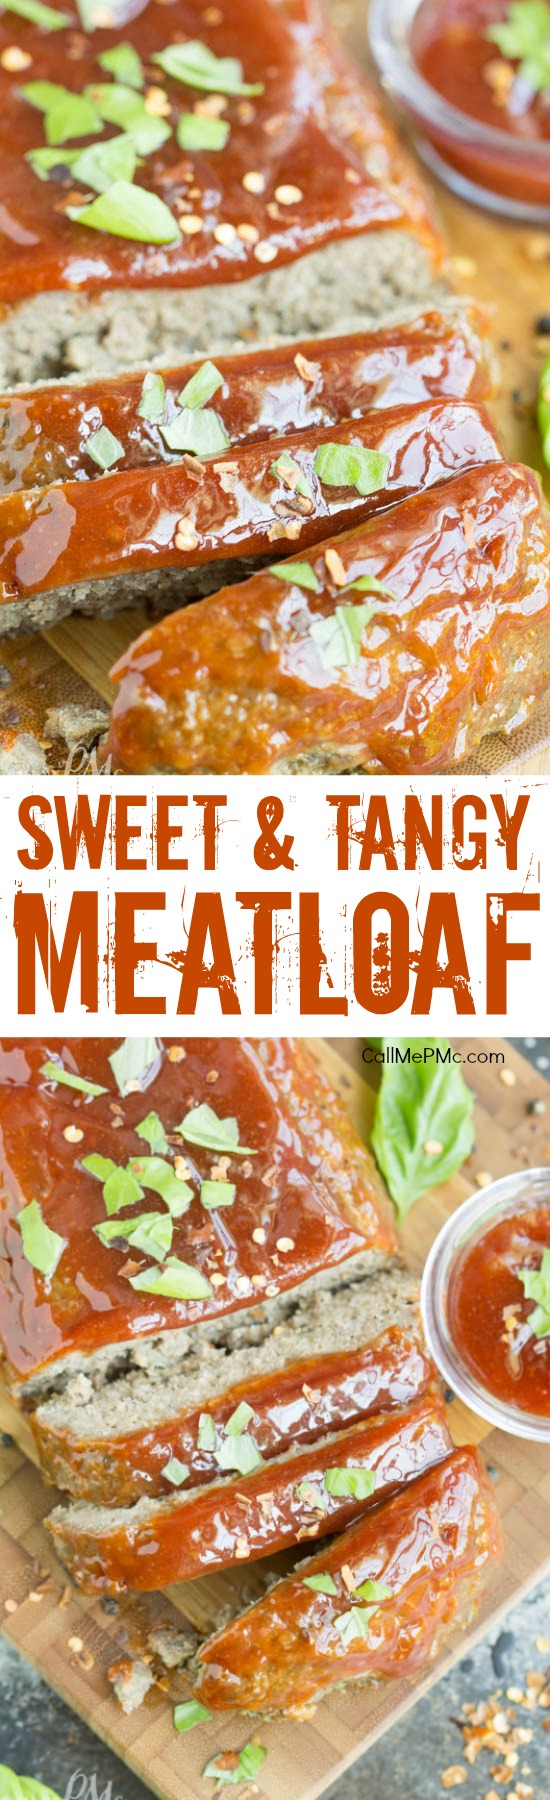 This Sweet and Tangy Meat Loaf is a classic meat loaf recipe with a zesty, zippy glaze. A family favorite, it's good for a quick weeknight meal & potlucks.